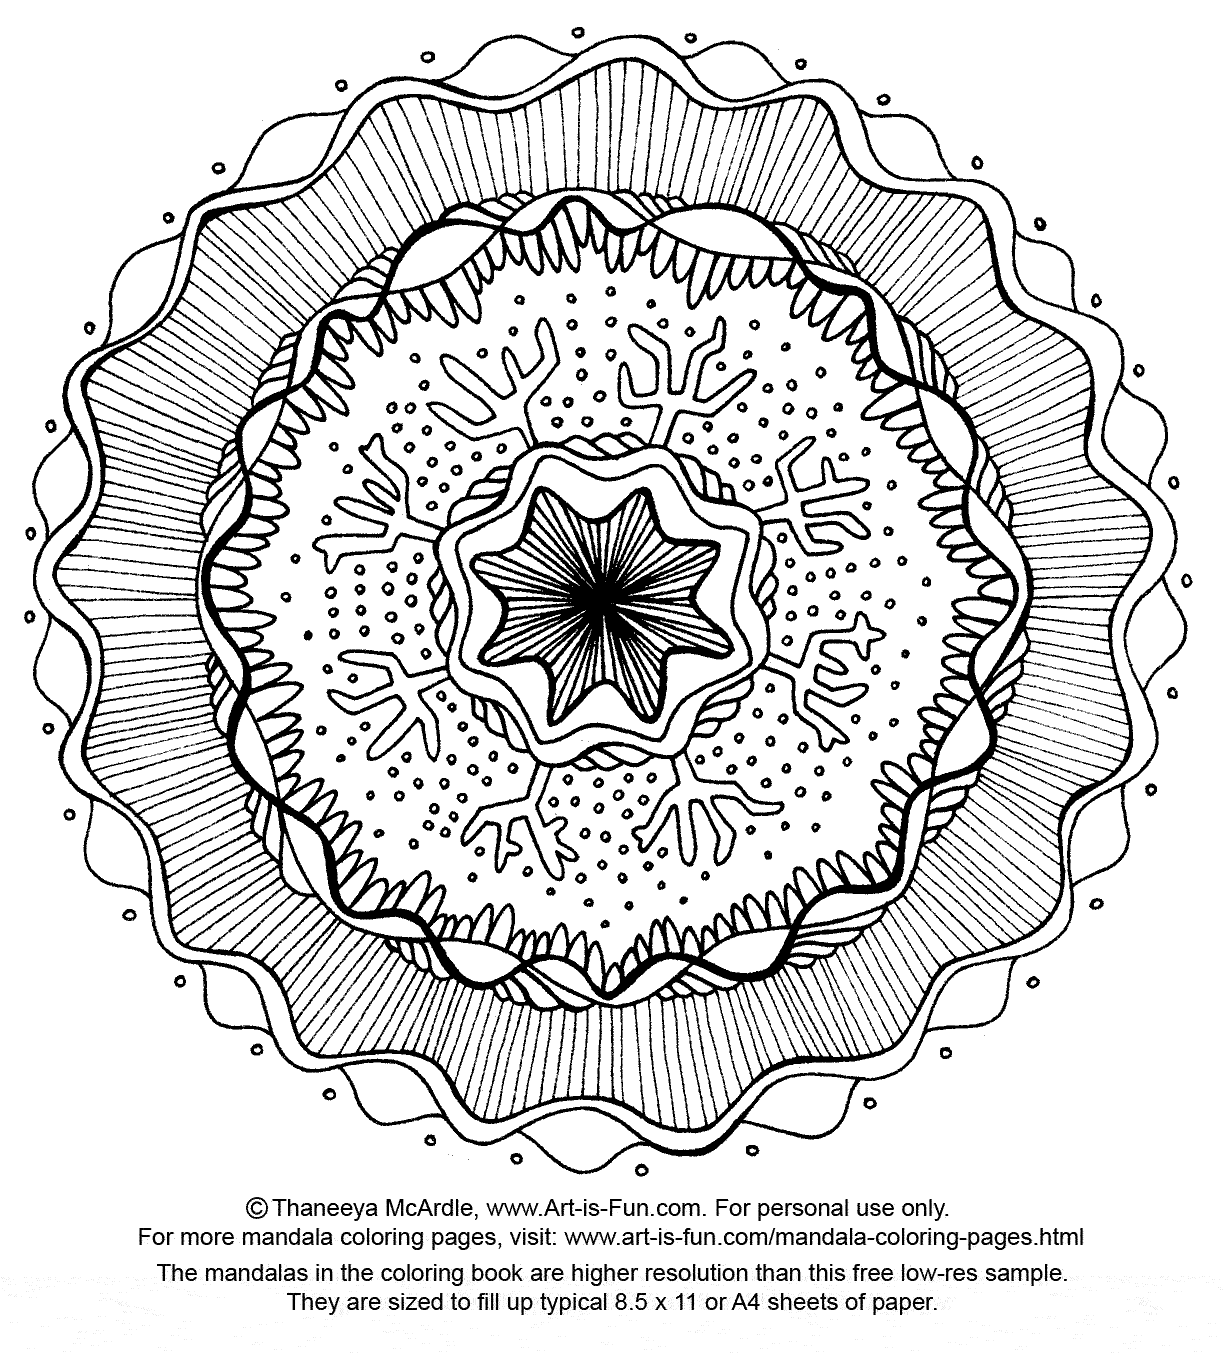 Mandala Coloring pages | FREE coloring pages | #40